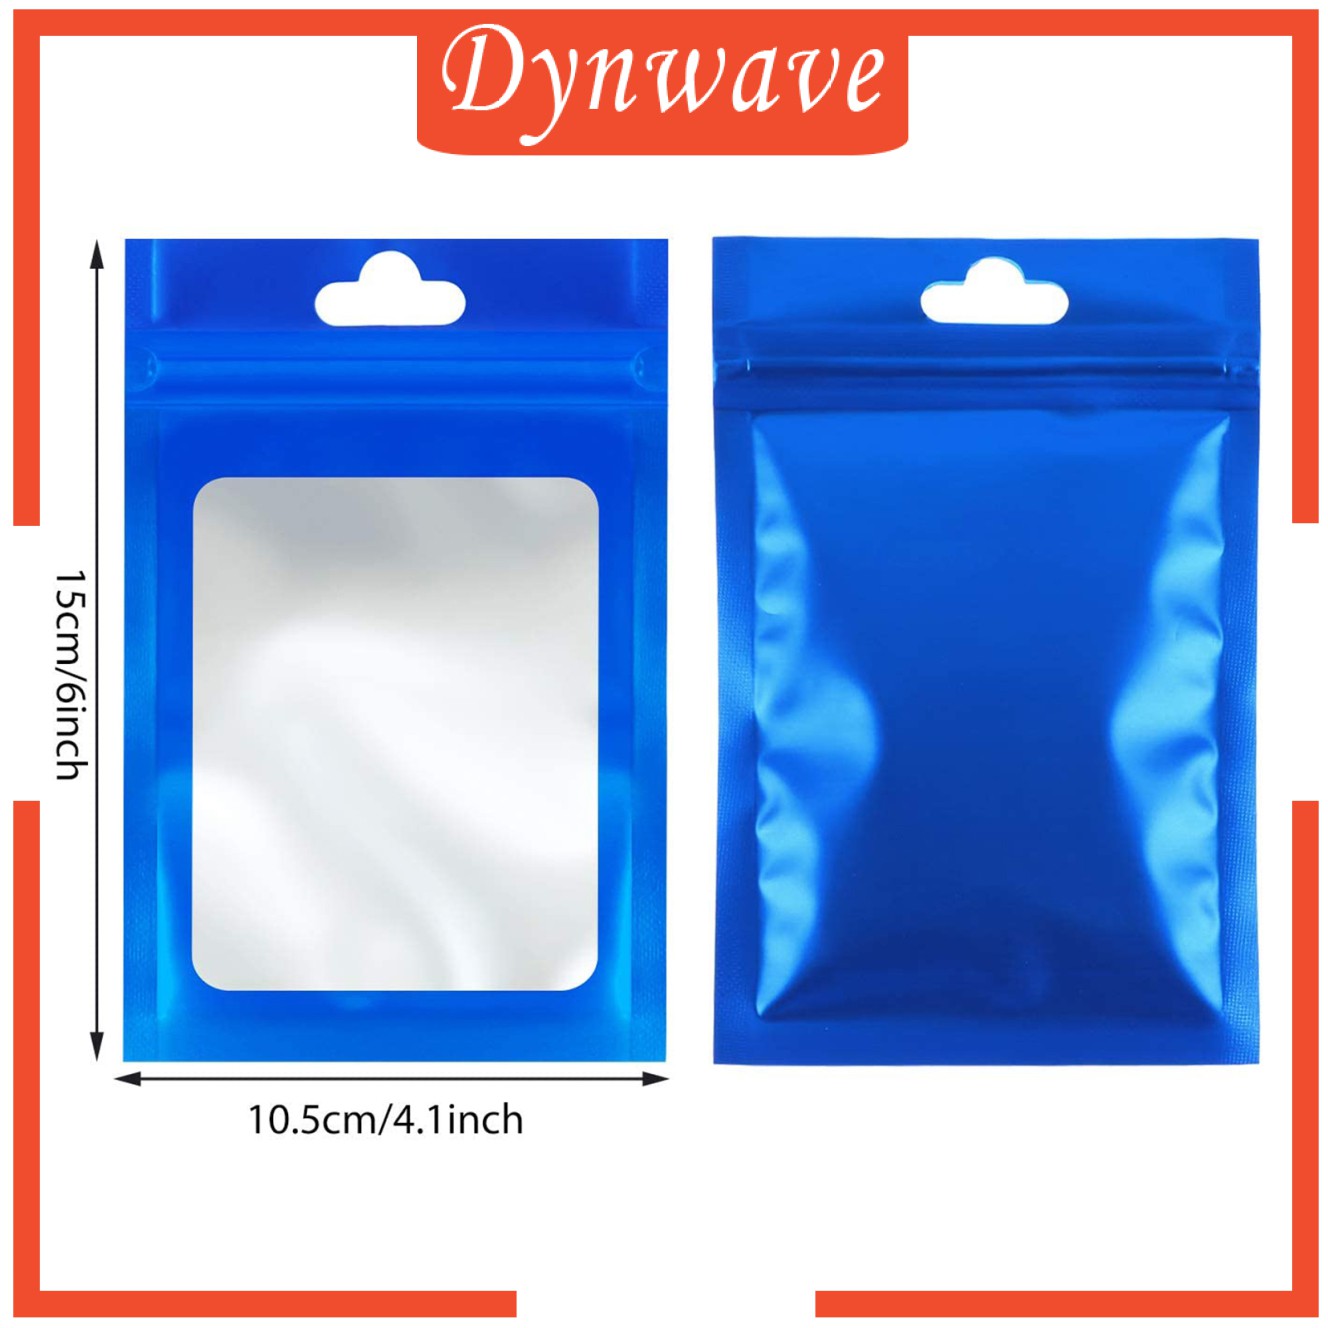 [DYNWAVE] 100pcs Mylar Foil Bags Resealable Food Container Packing Storing Sampling